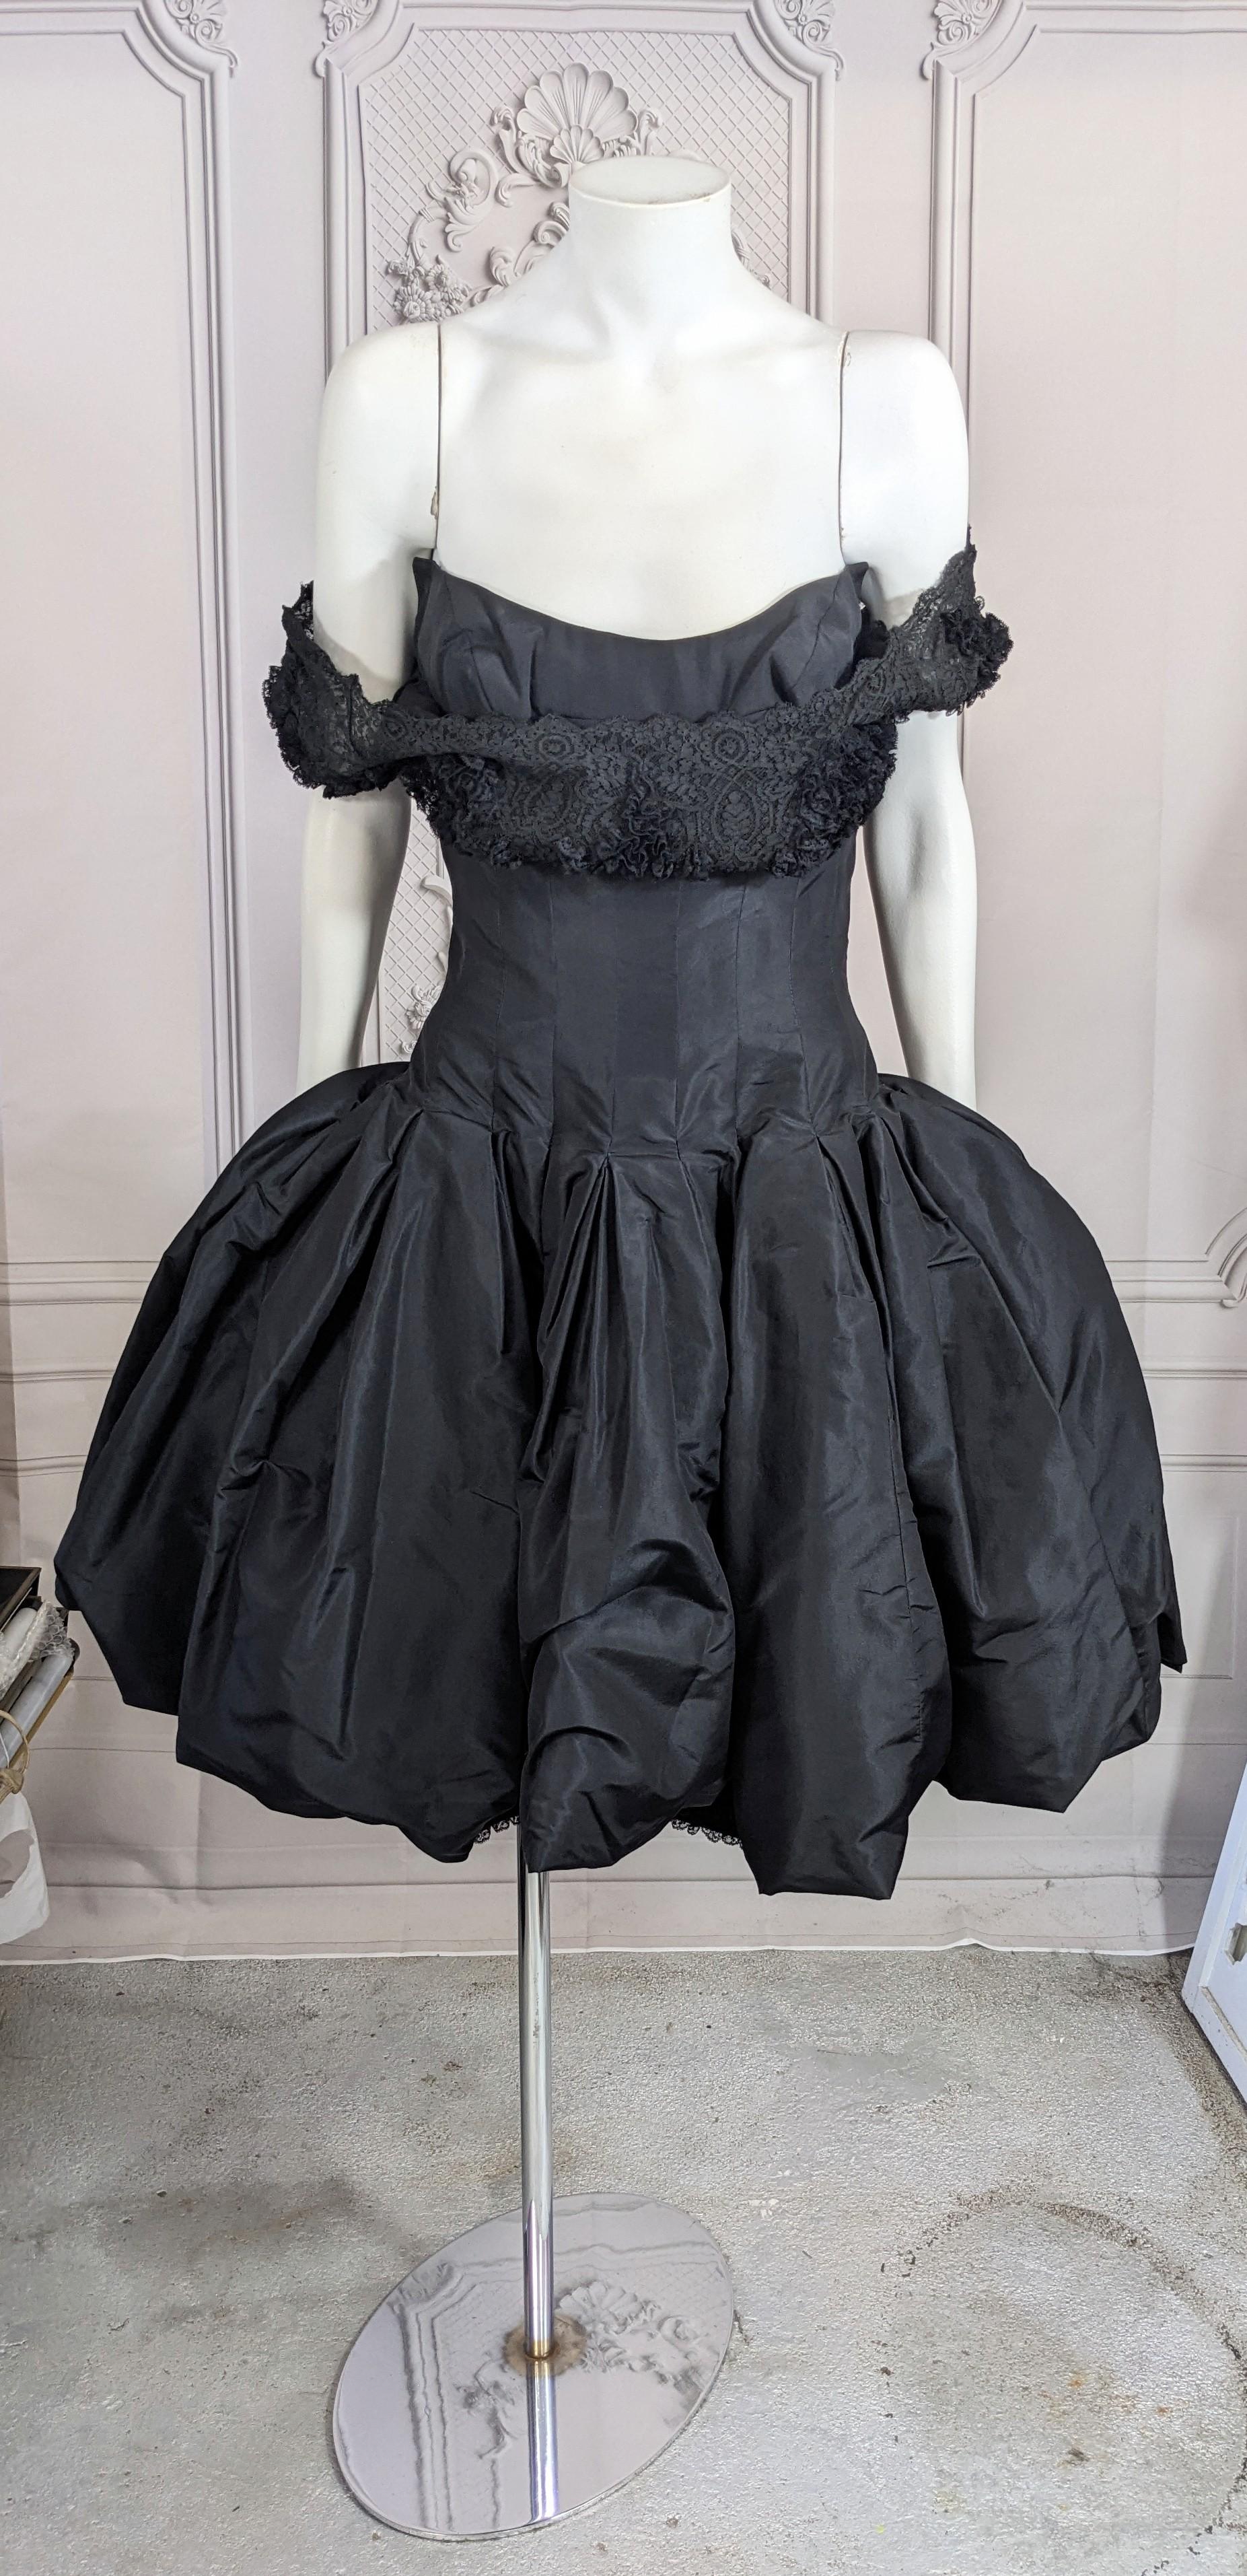 Mignon Silk Taffeta and Lace Cocktail Dress from the 1950's. Silk taffeta is tucked through the waist which opens into a full bouffant bubble skirt supported inside with tulle. Dress has a crepe base with skinny skirt trimmed in a deep hem of tiny